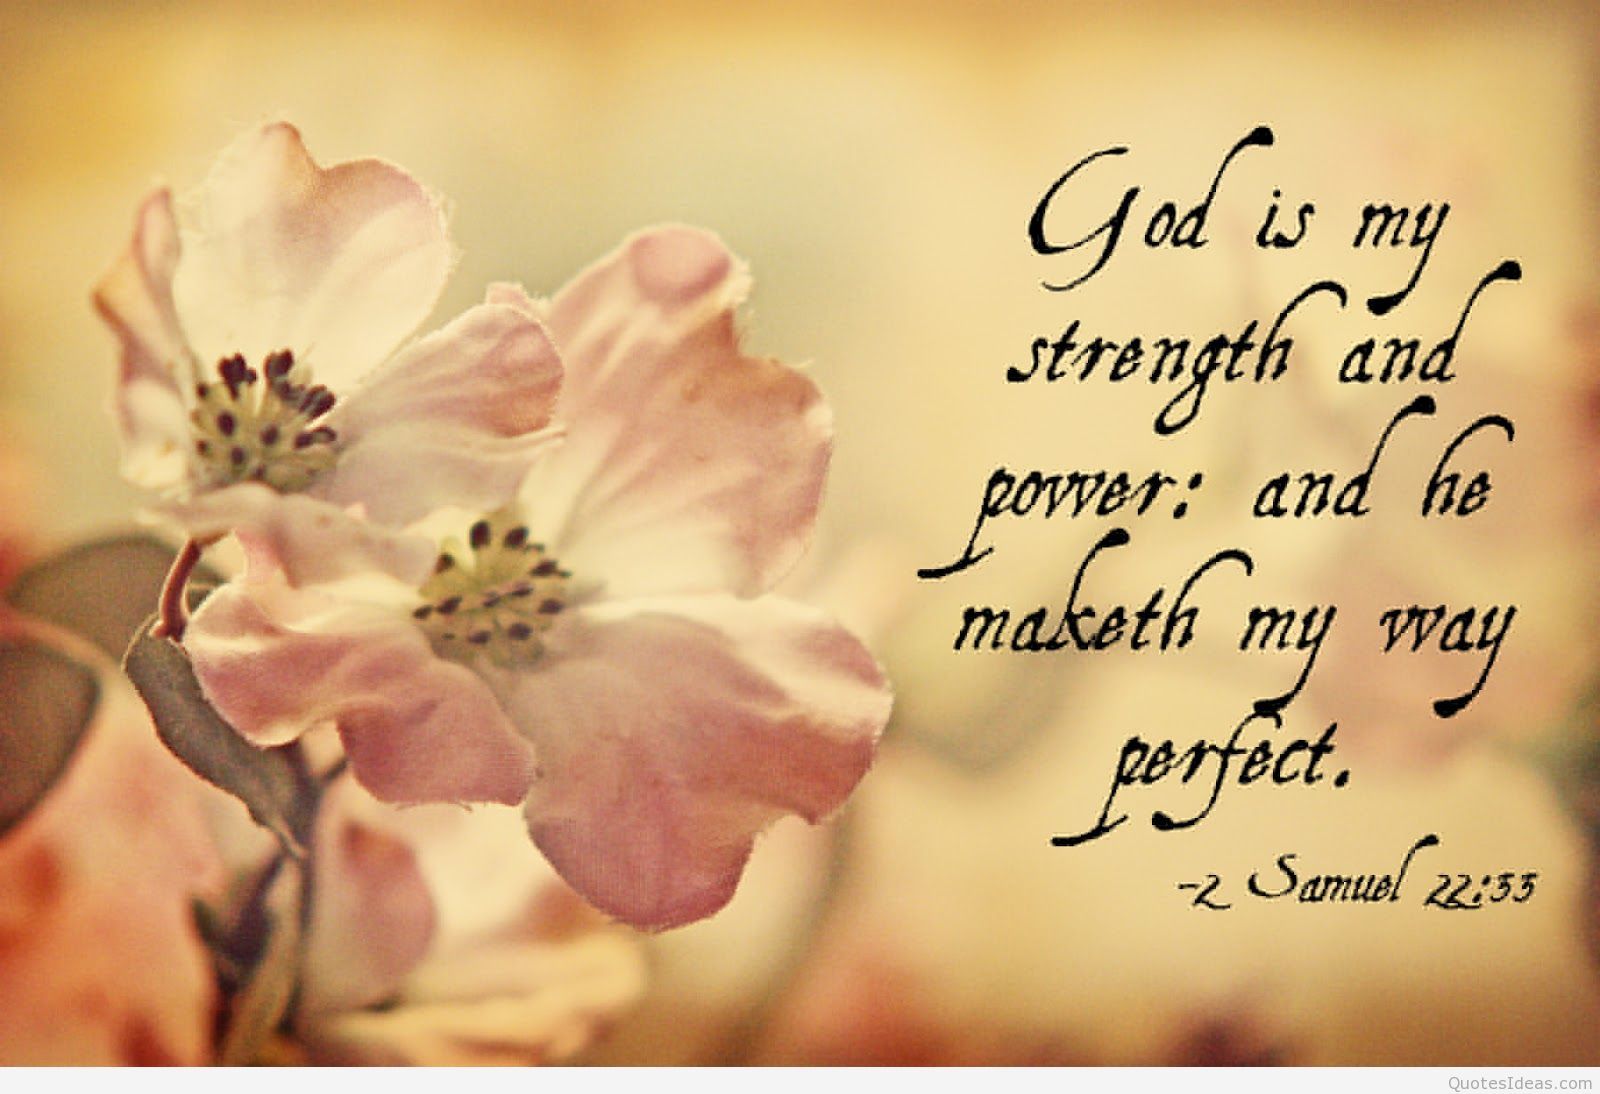 Strength quotes image and background hd